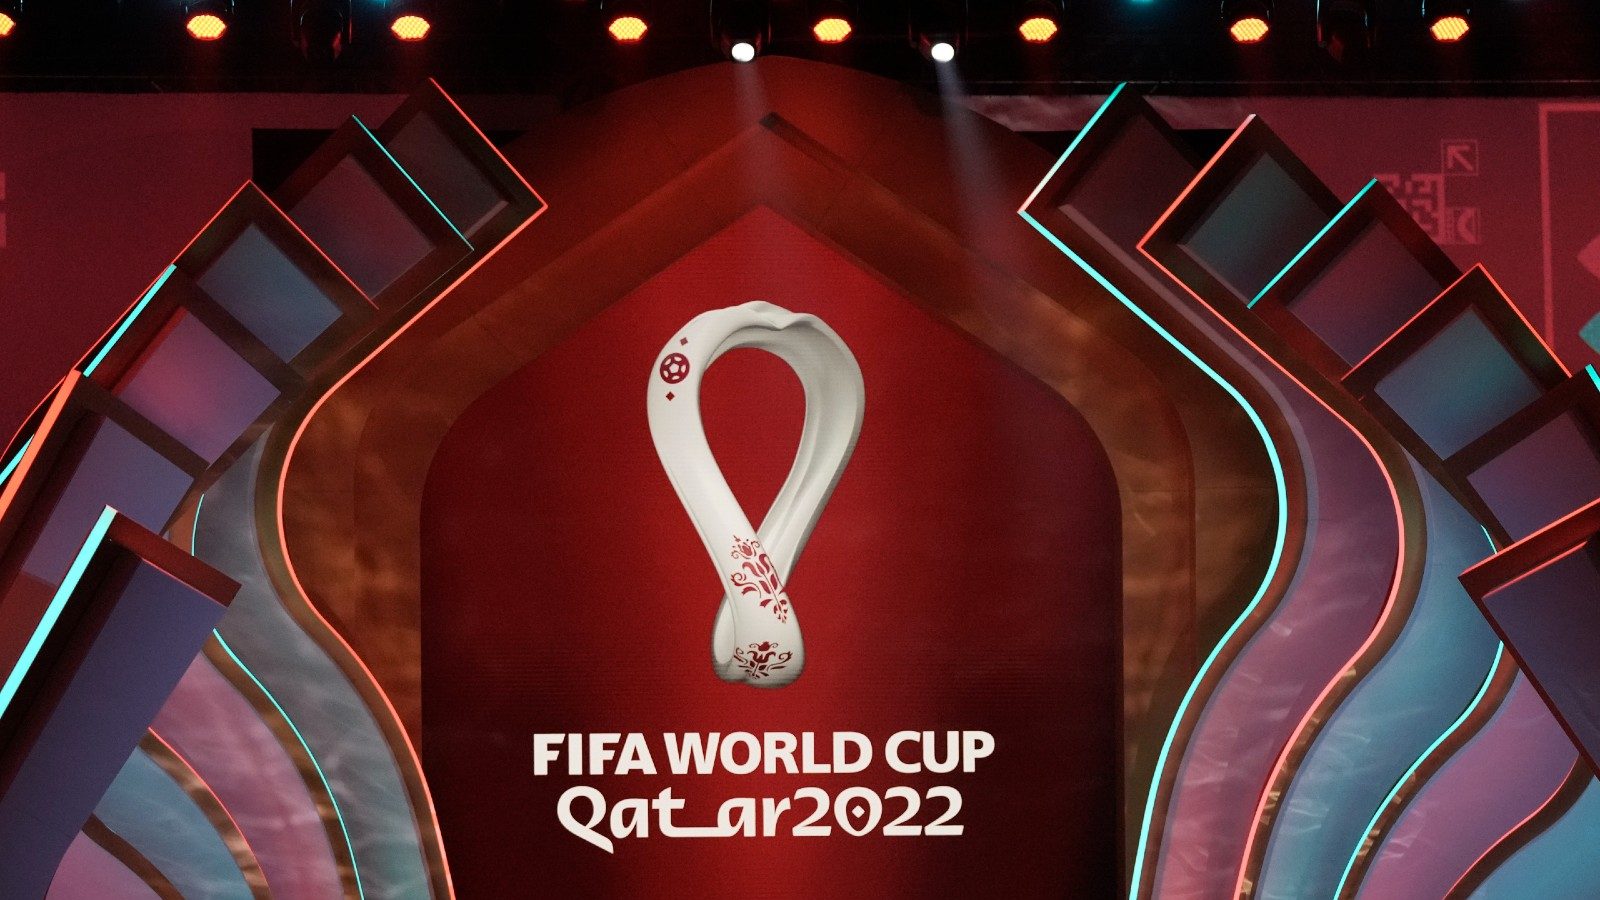 How to get Qatar world cup tickets